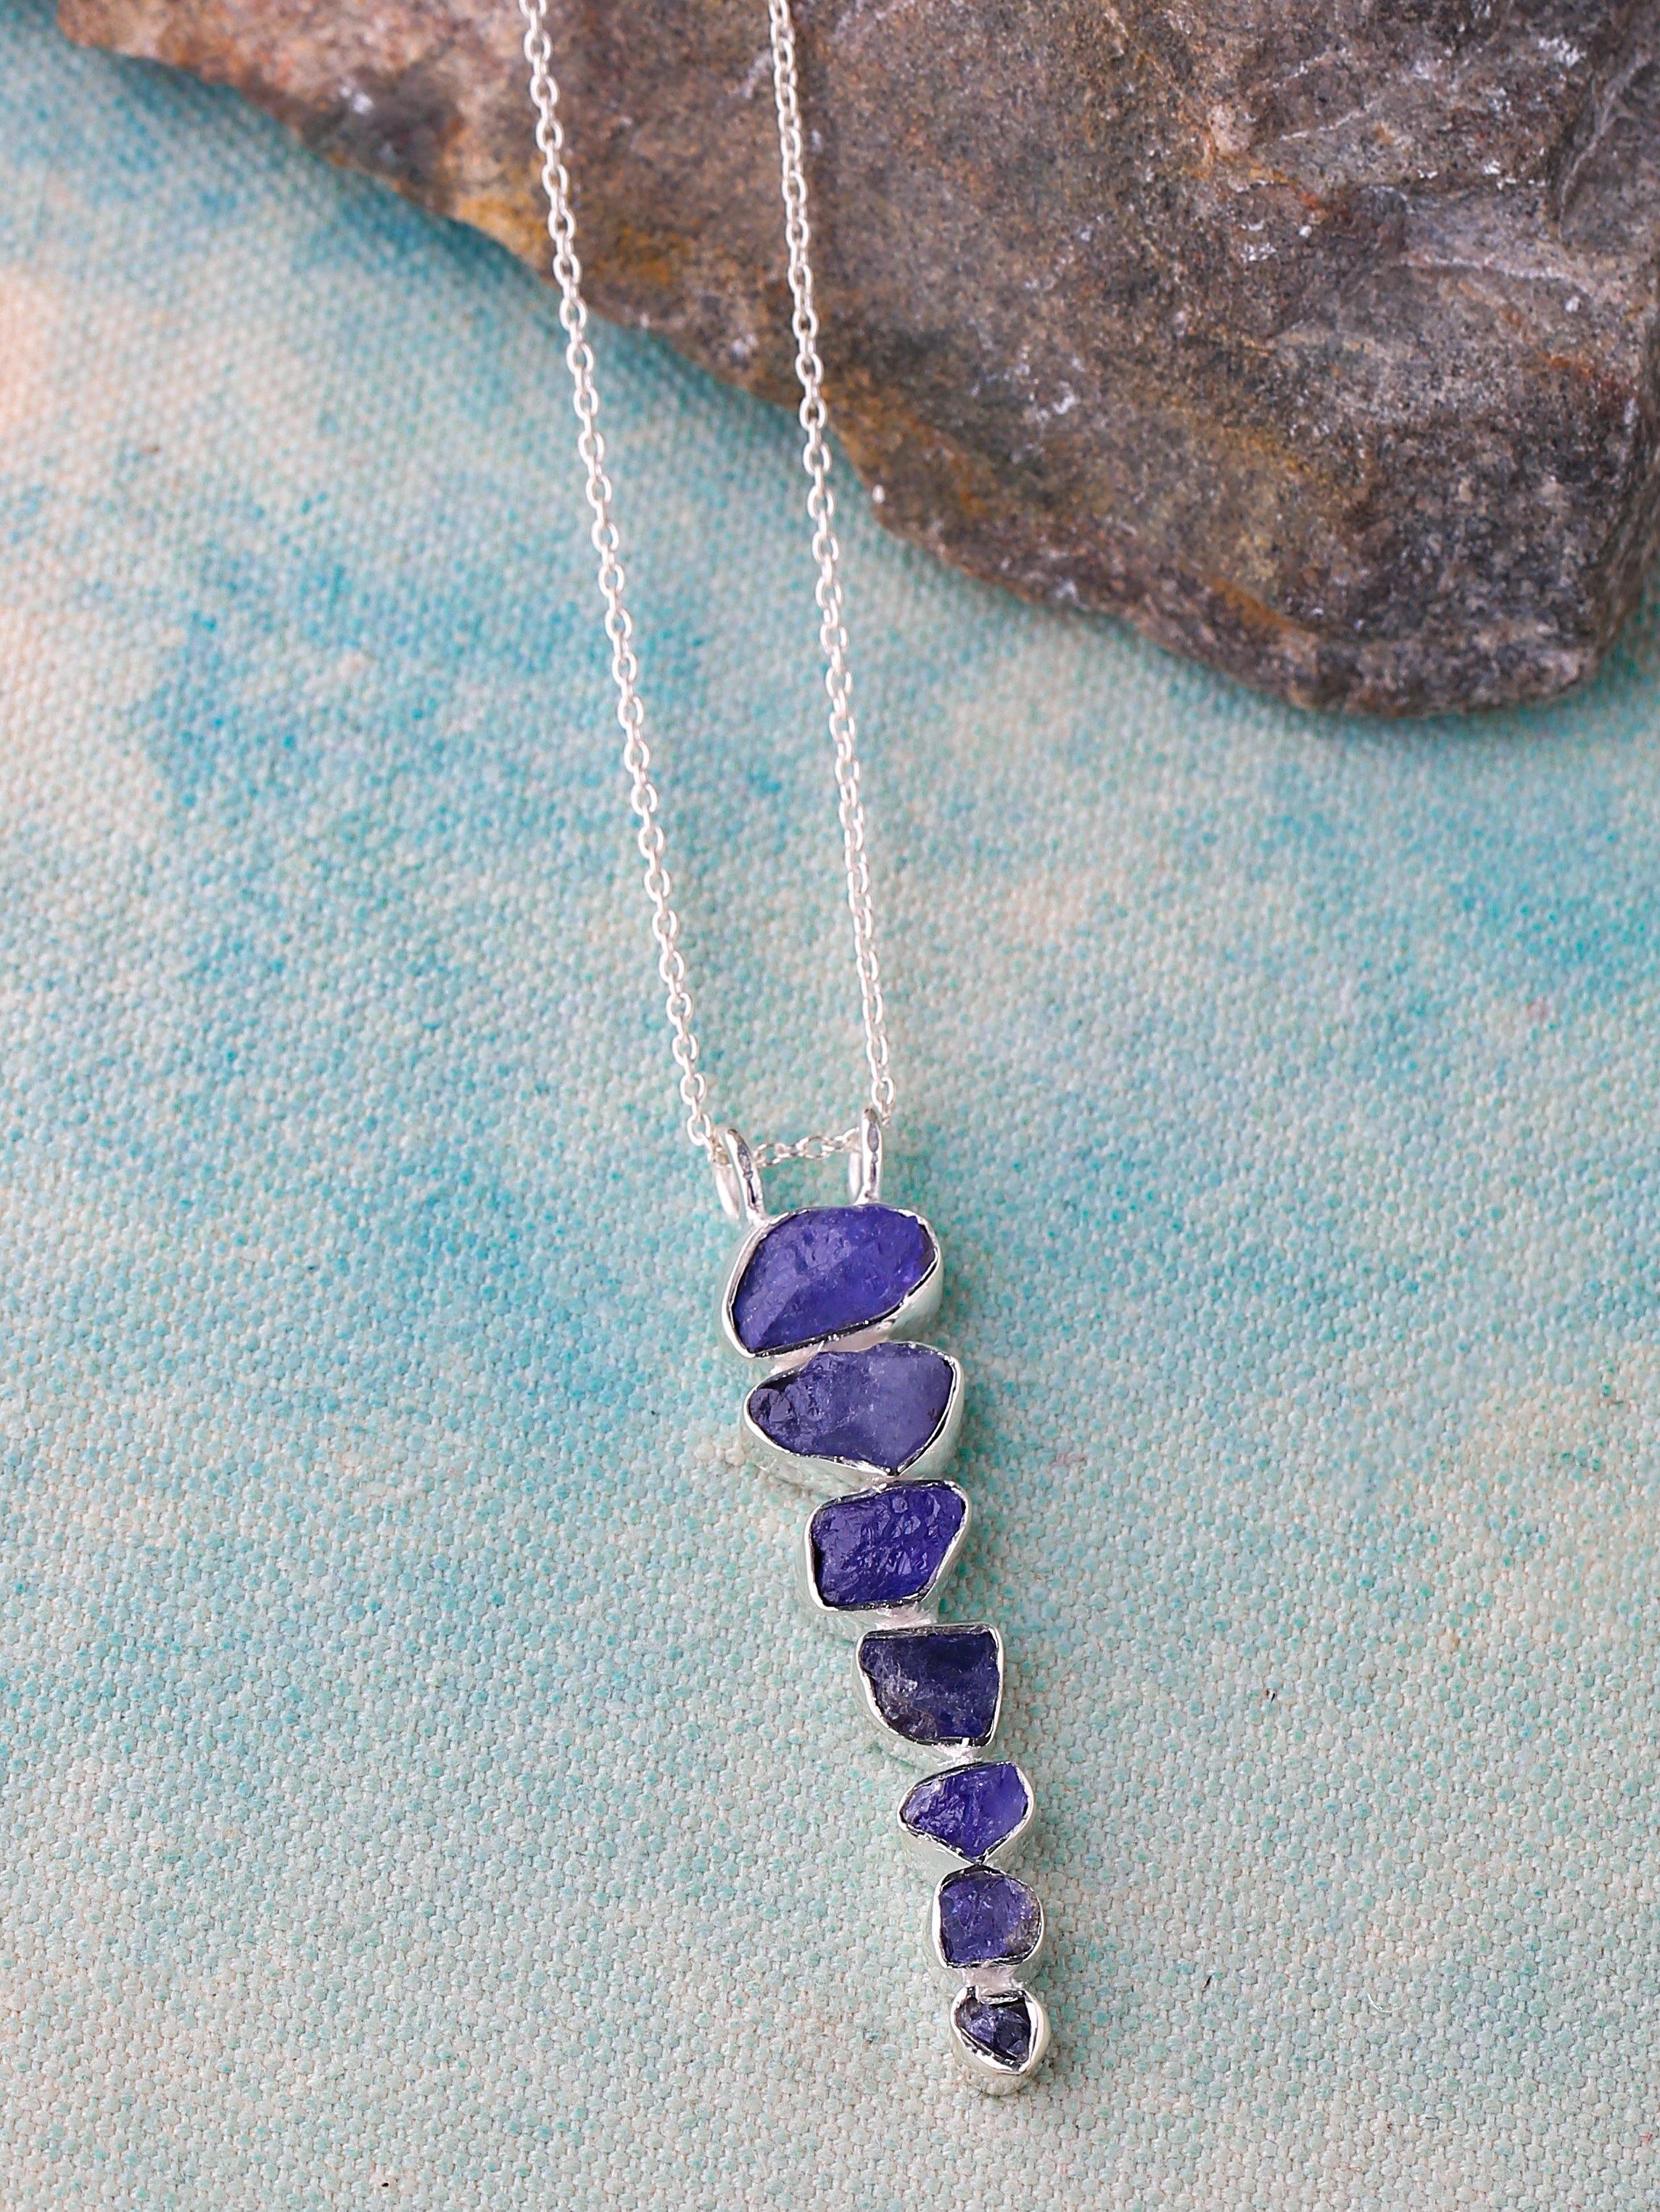 Rough Tanzanite Solid 925 Sterling Silver Pendant with 18 Inch Chain Necklace Jewelry - YoTreasure